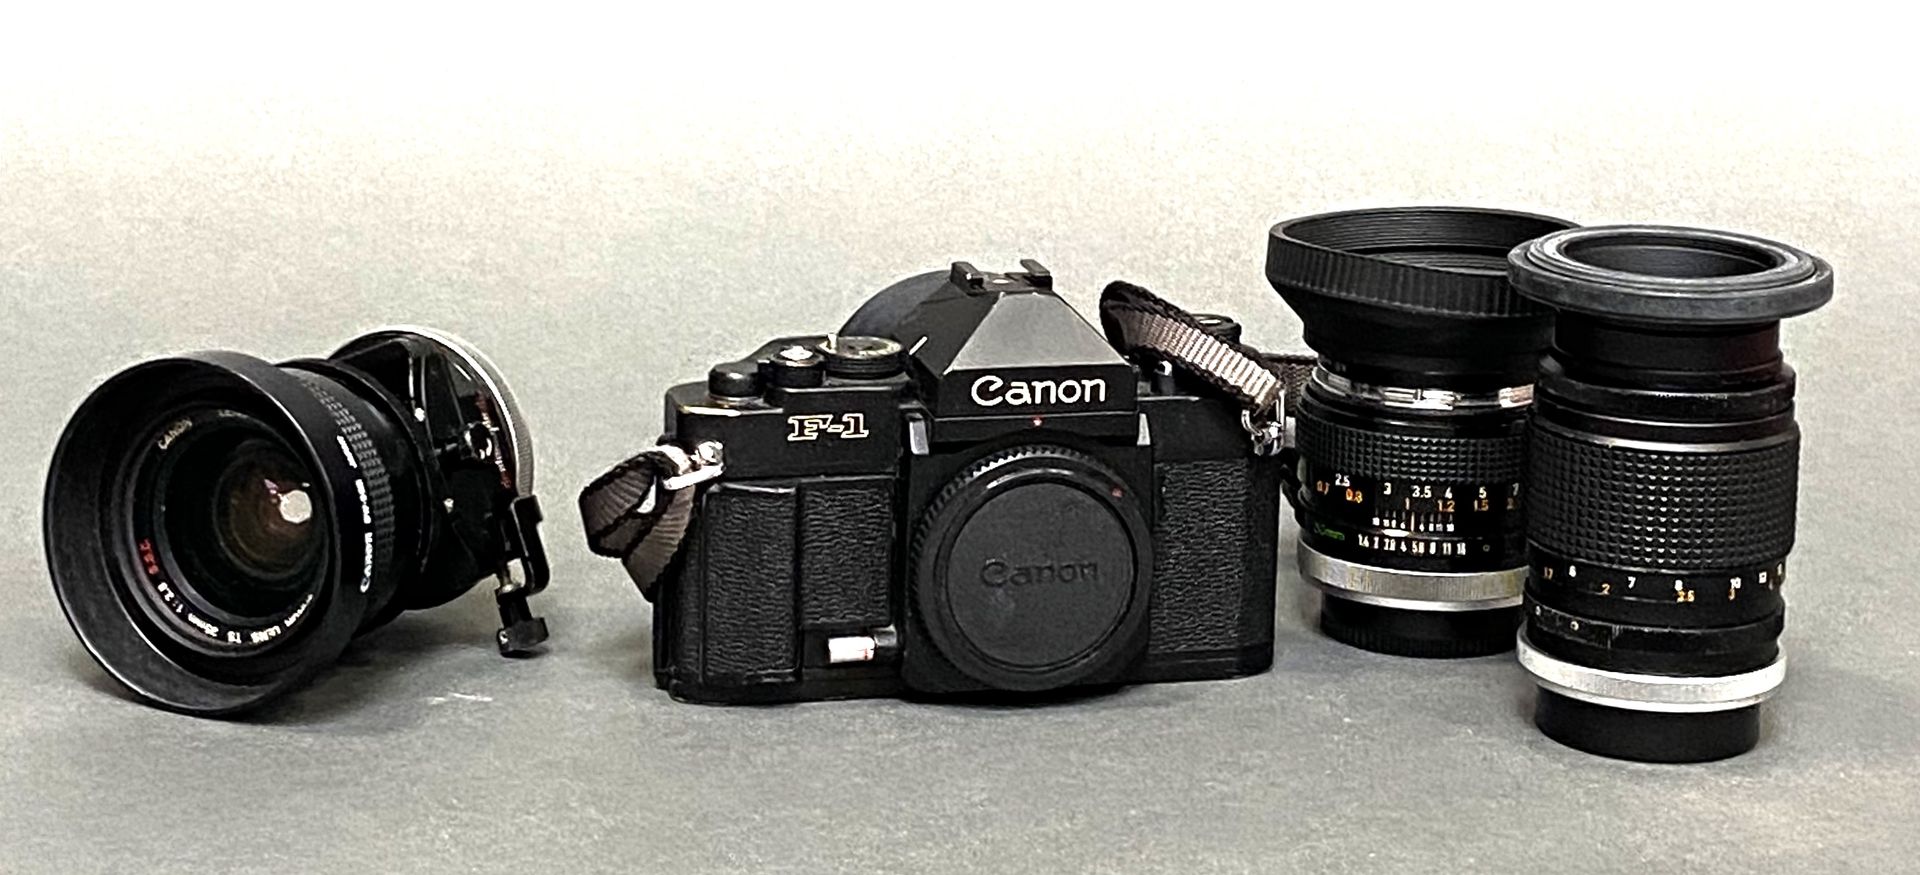 Null CANON F1 camera and three lenses. An EUMIG C3 CAMERA is included.